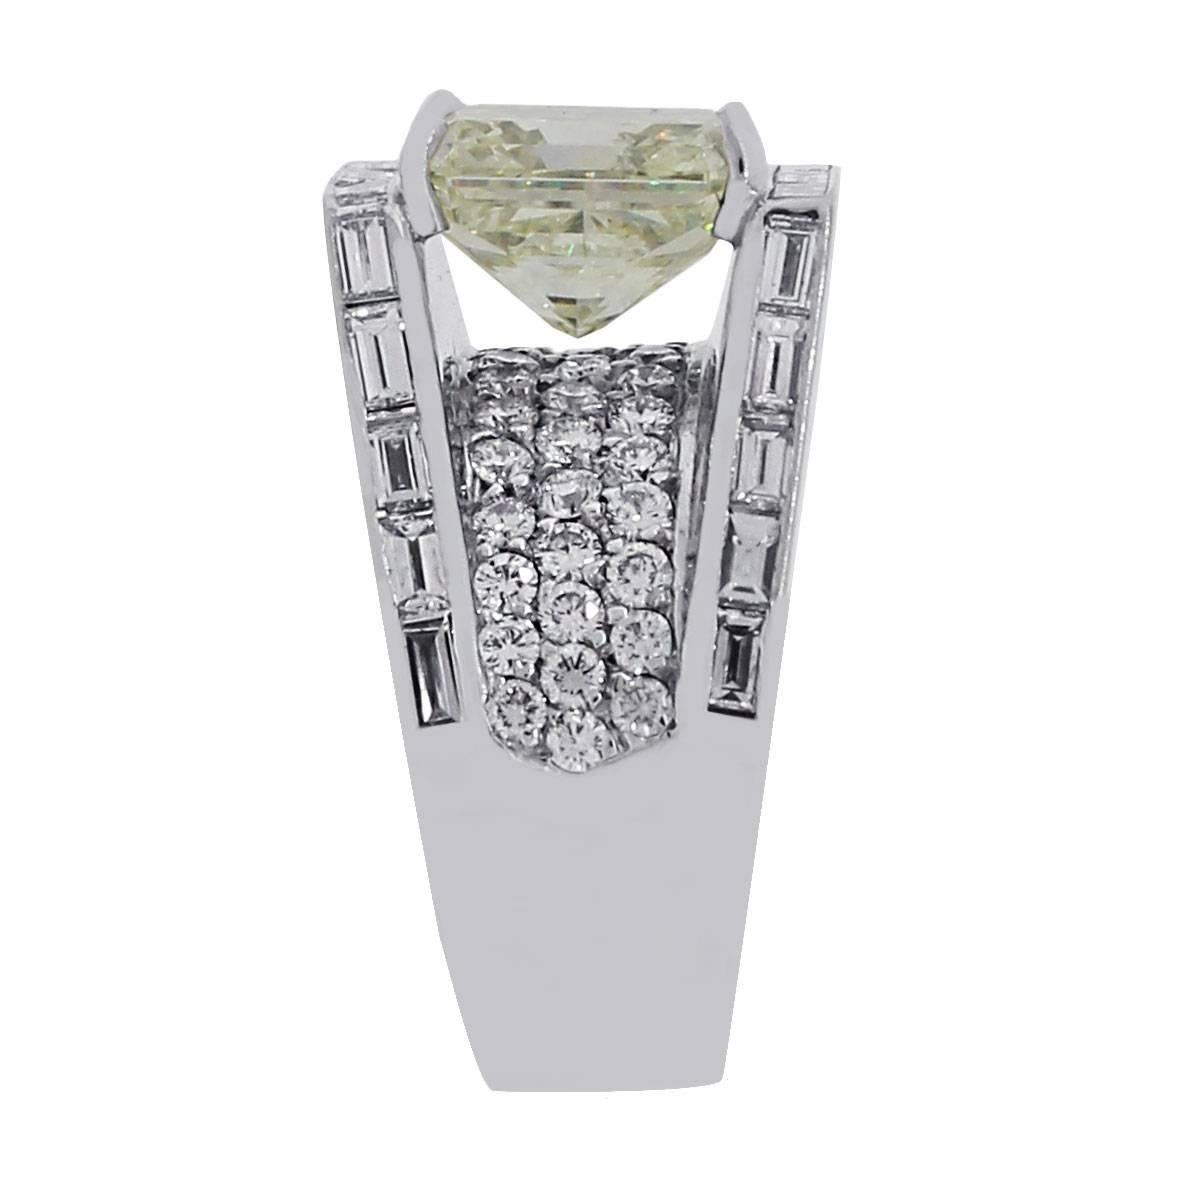 Material: 18k white gold
Diamond Details: Approximately 7.02ct radiant cut diamond, L color and SI3 clarity. Also contains approximately 5ctw of round brilliant and baguette cut diamonds. Diamonds are H/I color and SI2 in clarity.
Size: 9
Total